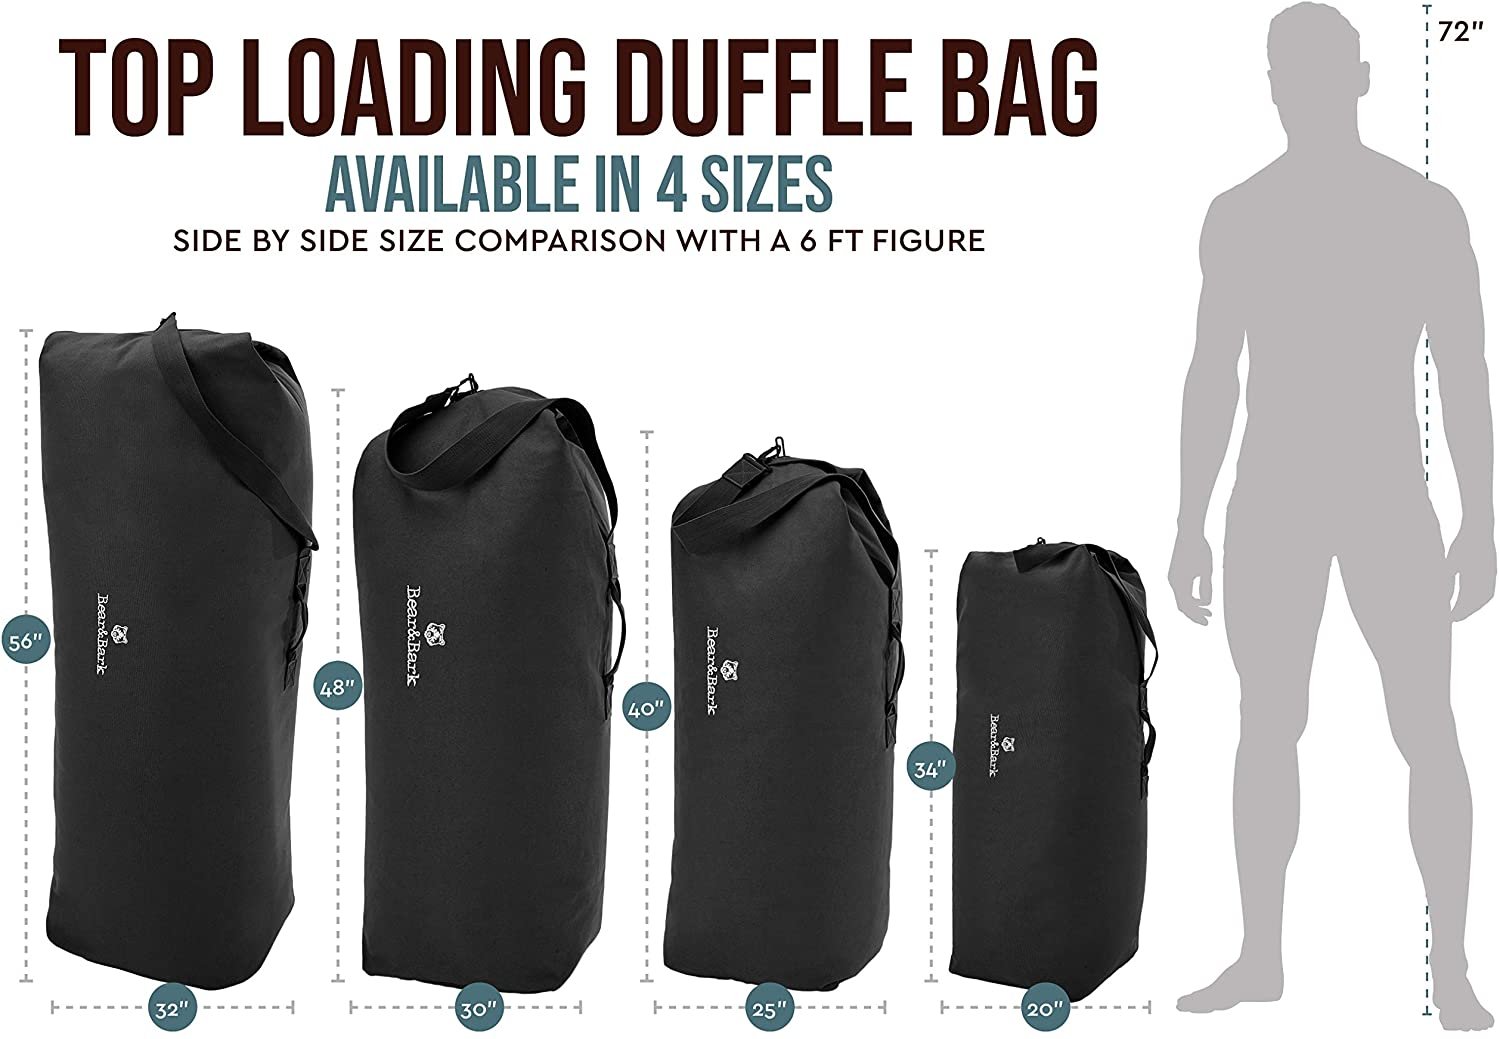 Top Loader Canvas Duffel Bag - Black 56"x32" - Military and Army Cargo Style Carryall Duffel for Men and Woman